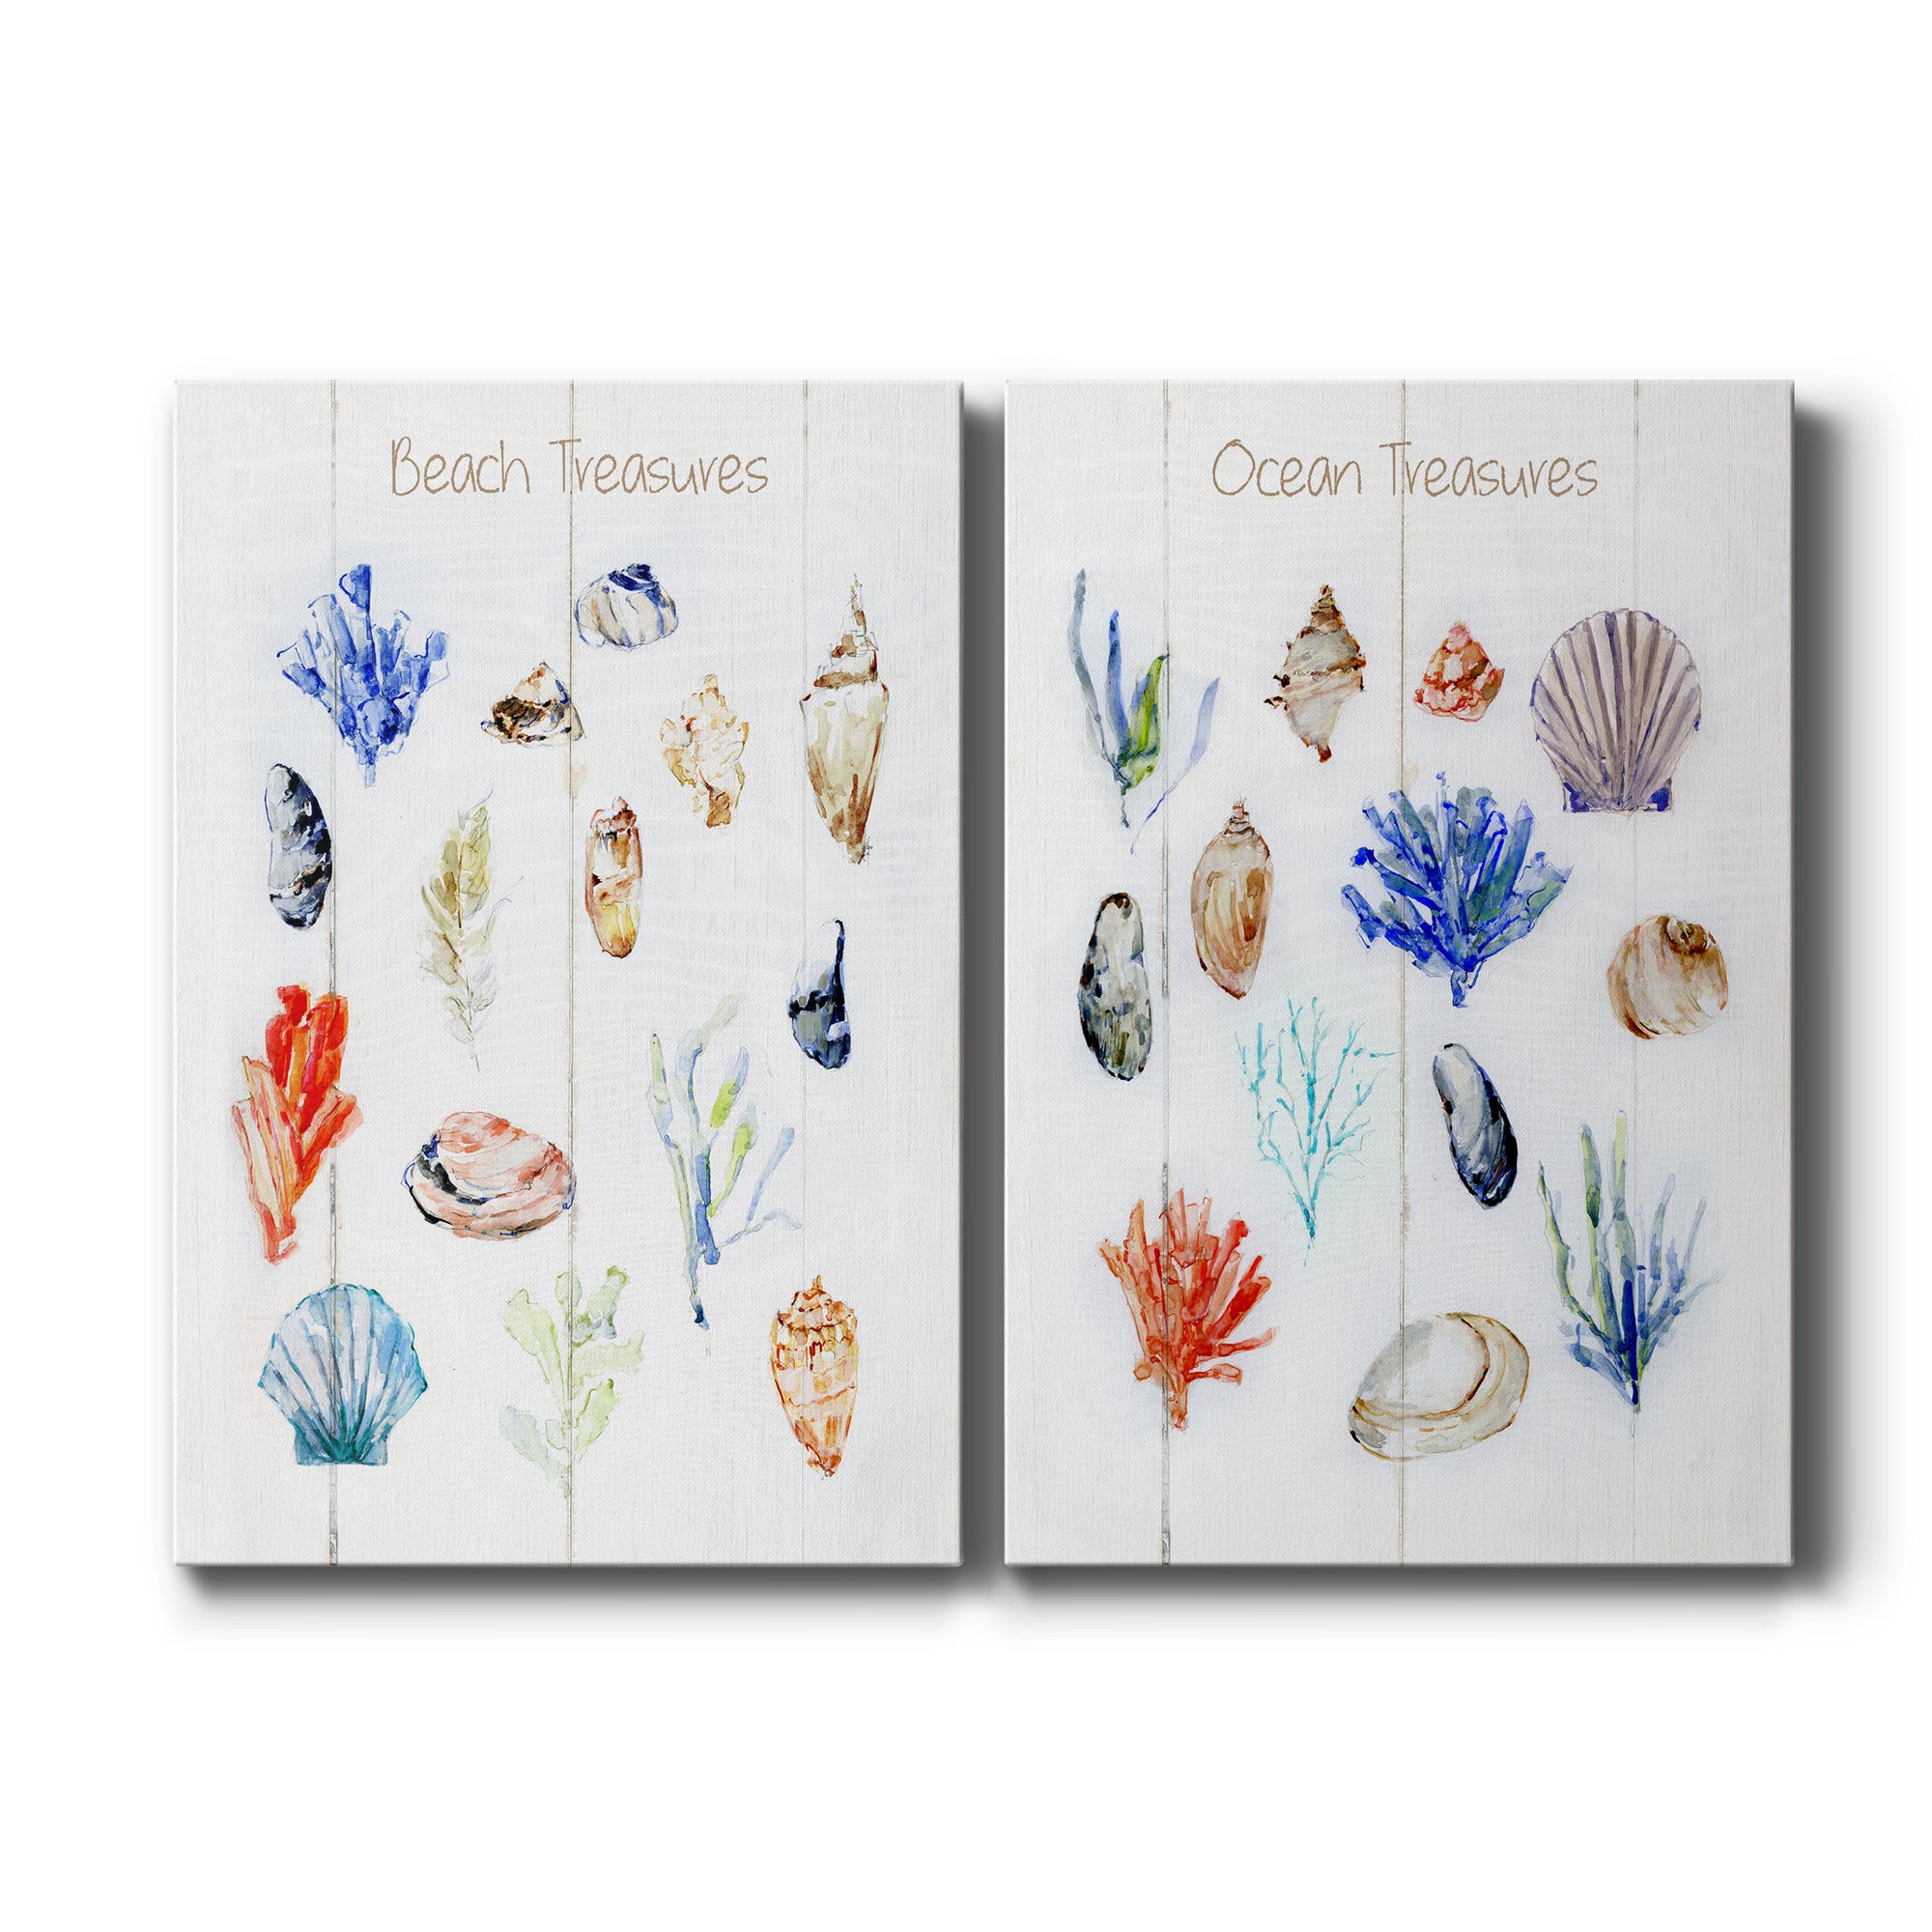 Beach Treasures Premium Gallery Wrapped Canvas - Ready to Hang